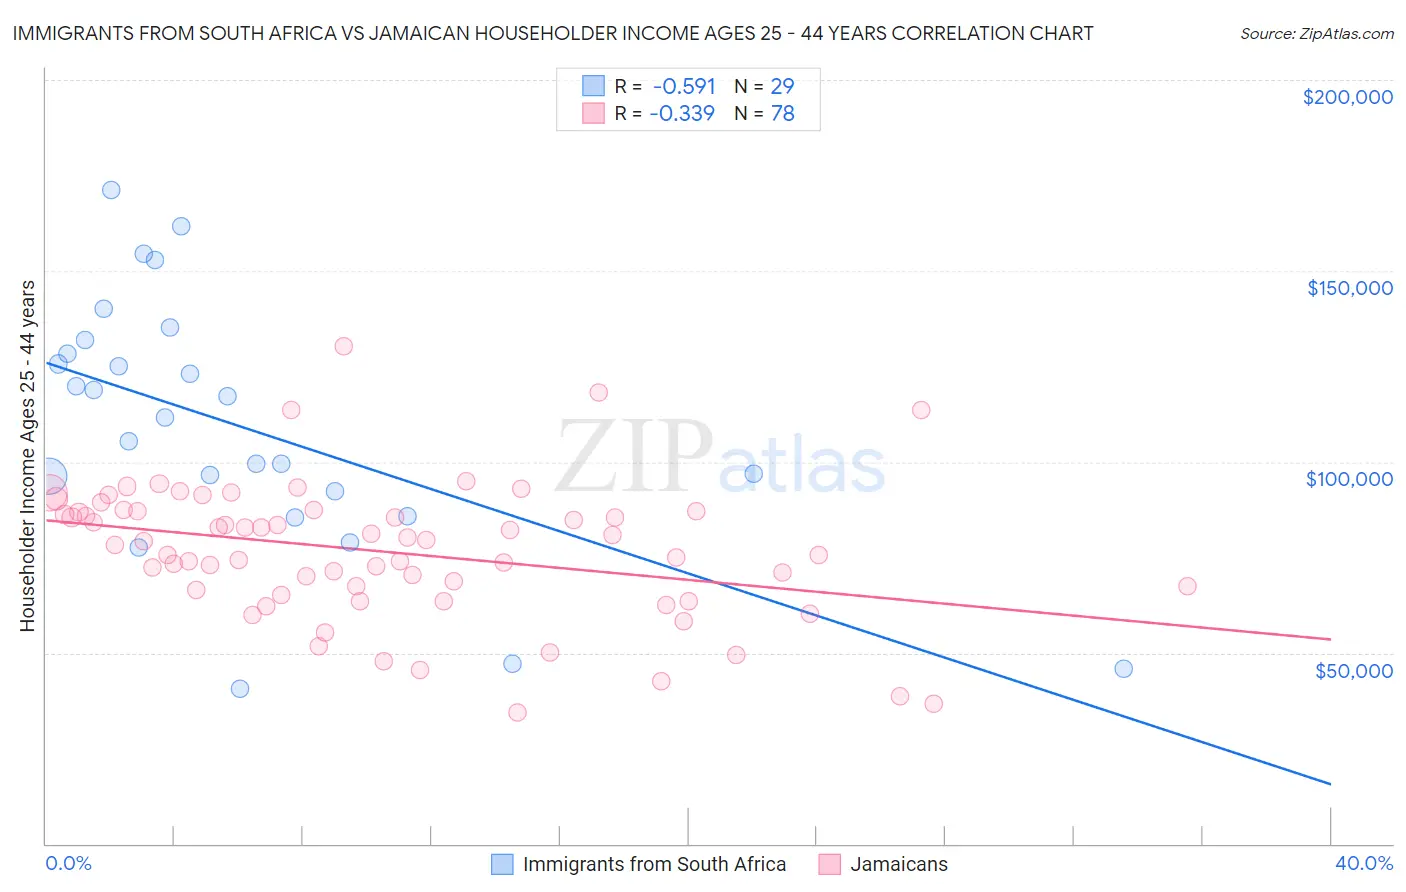 Immigrants from South Africa vs Jamaican Householder Income Ages 25 - 44 years